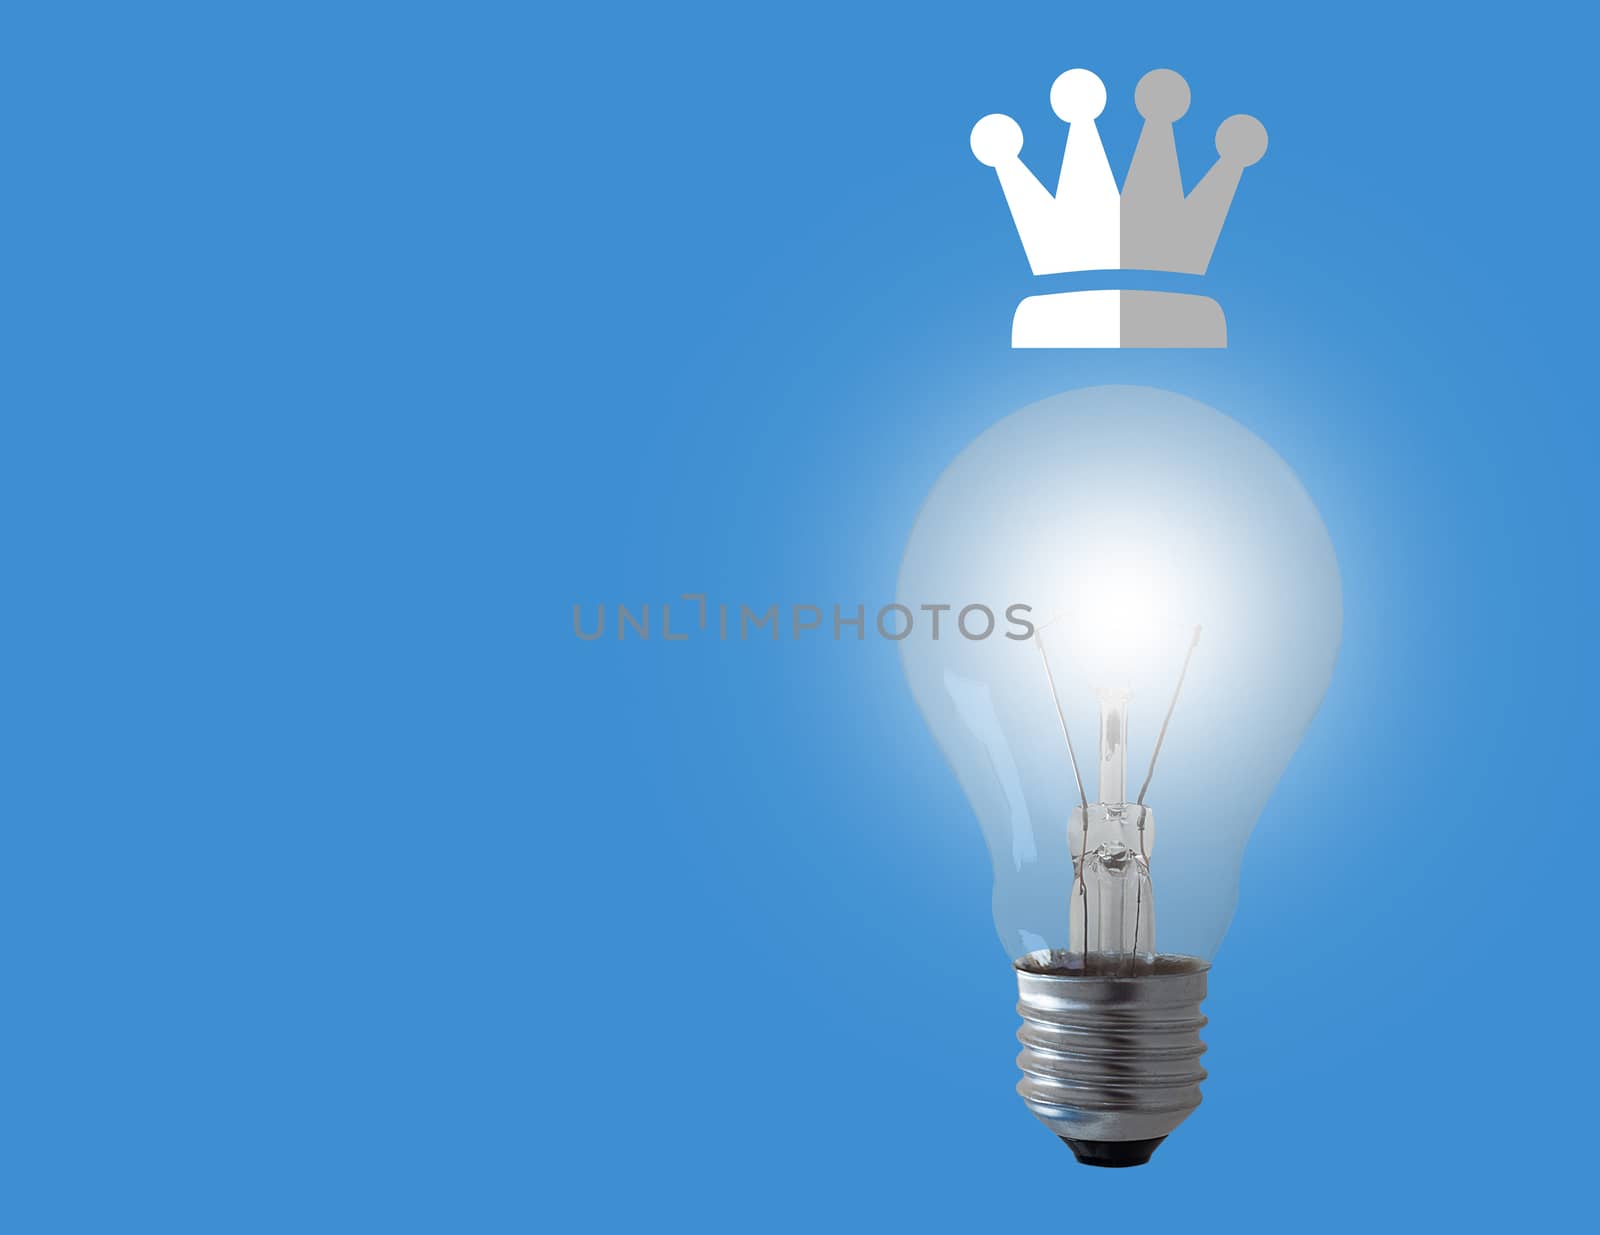 Think big concept, light bulb and crown on blue background, business leadership